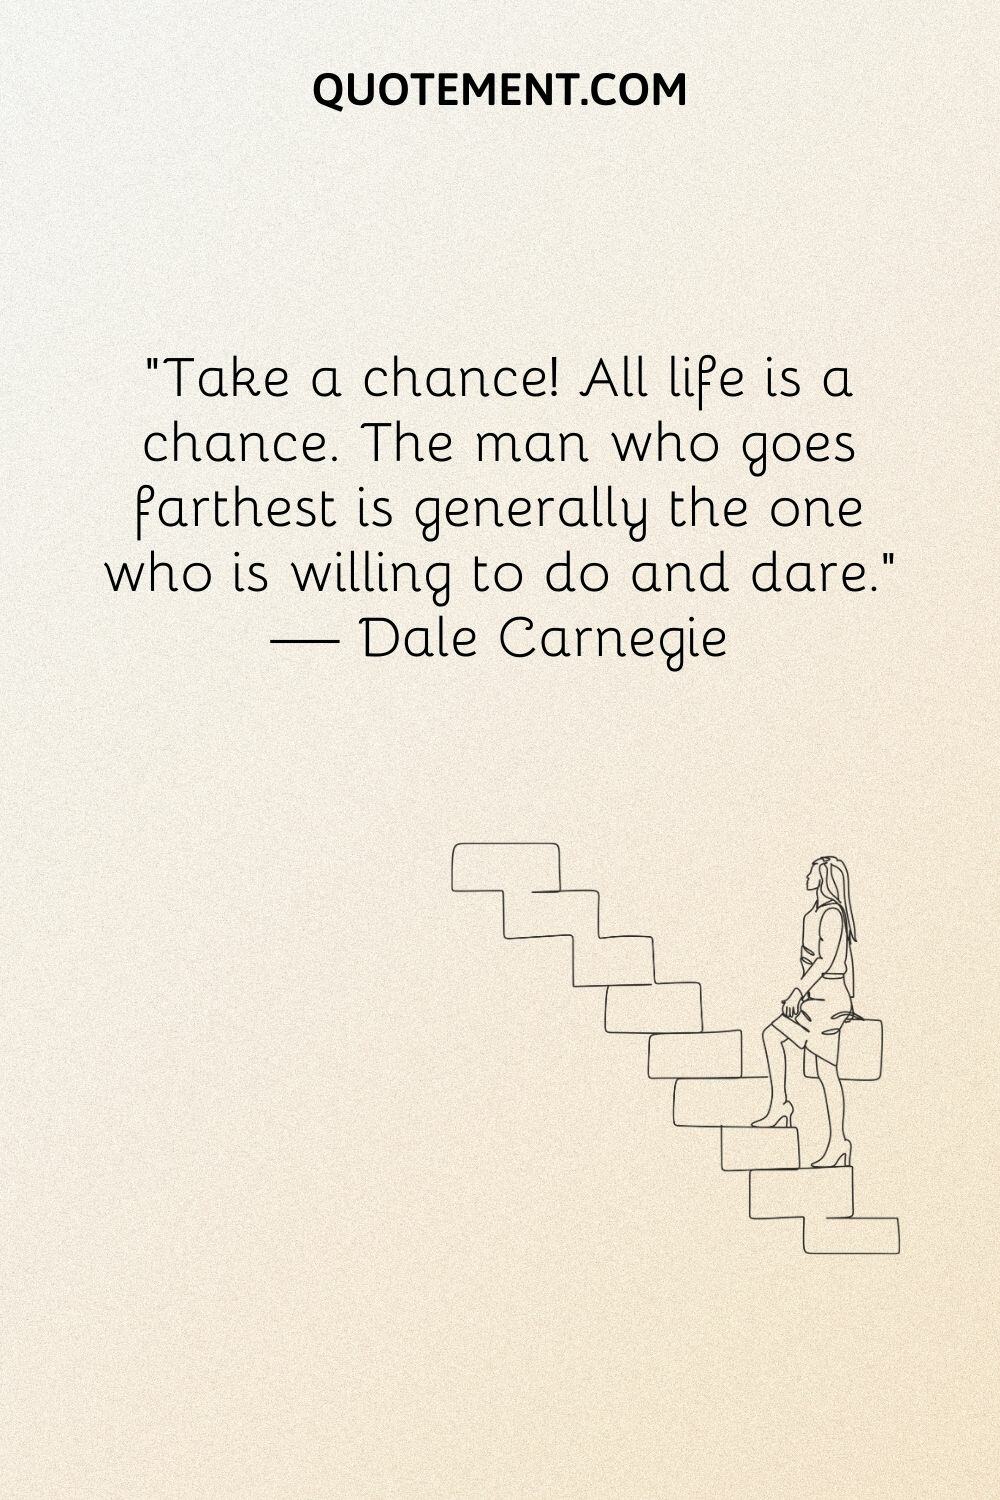 Take a chance! All life is a chance.